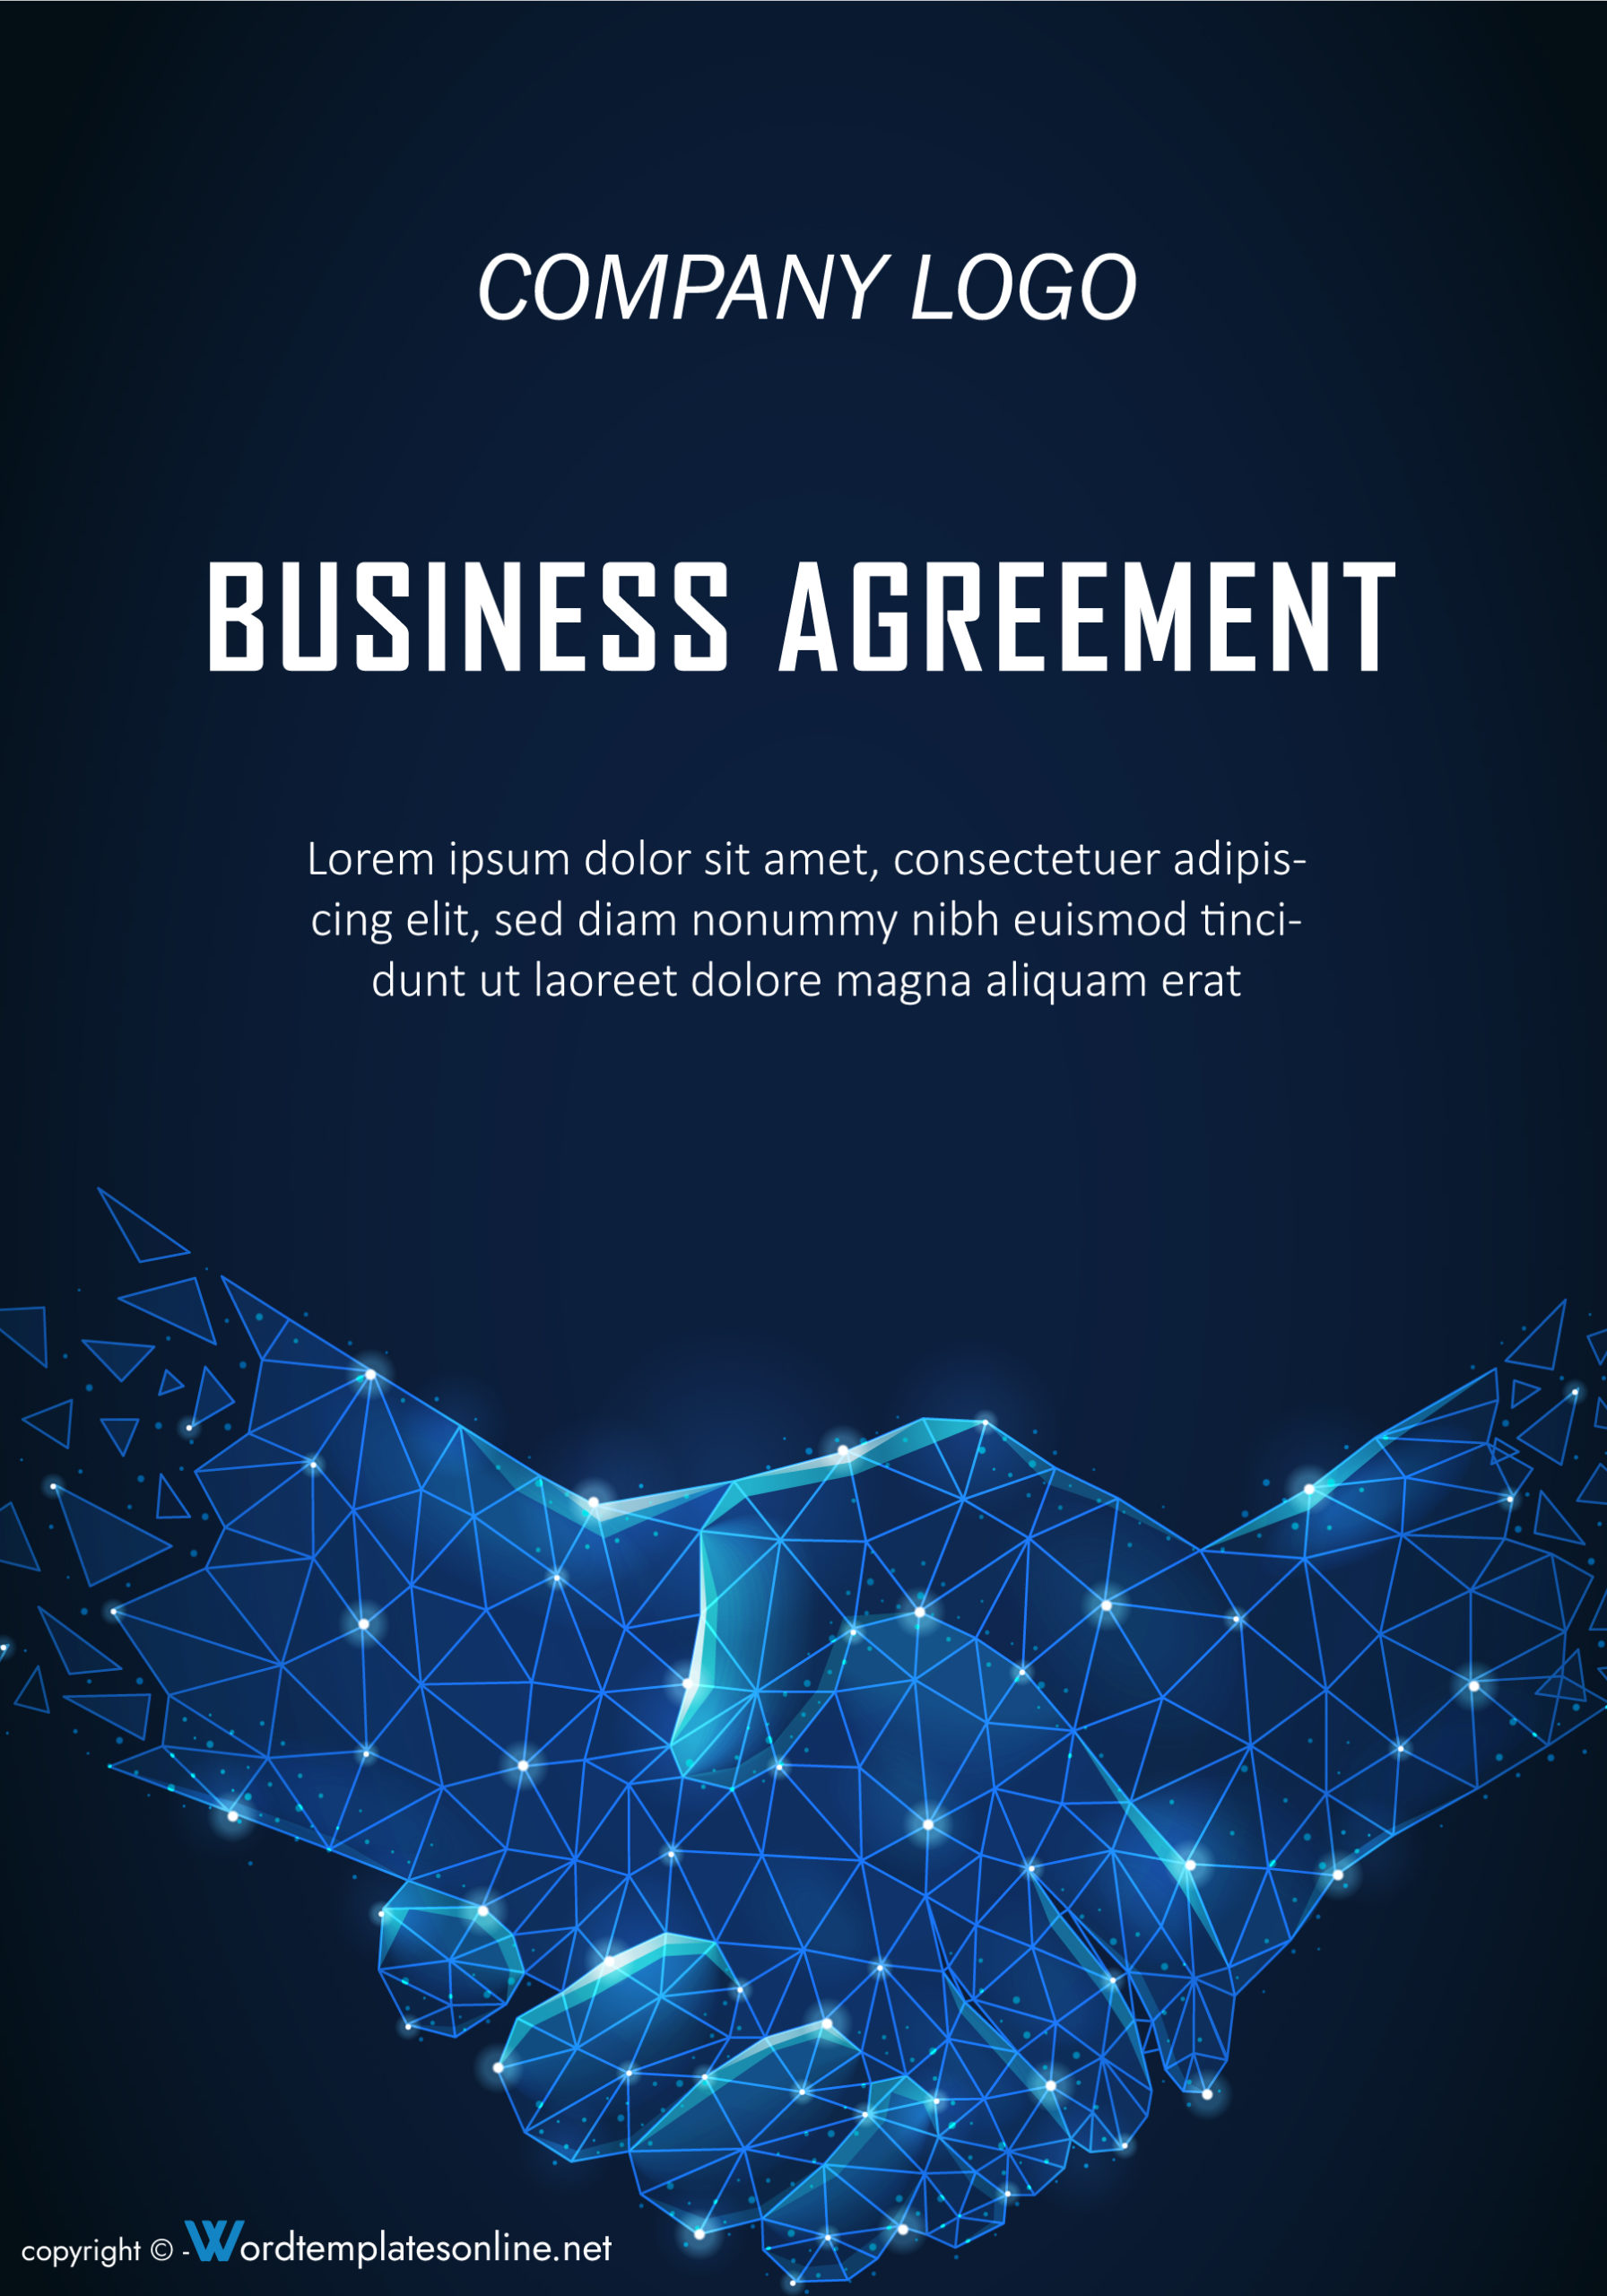 Business Agreement Cover Page Example - Printable and Editable